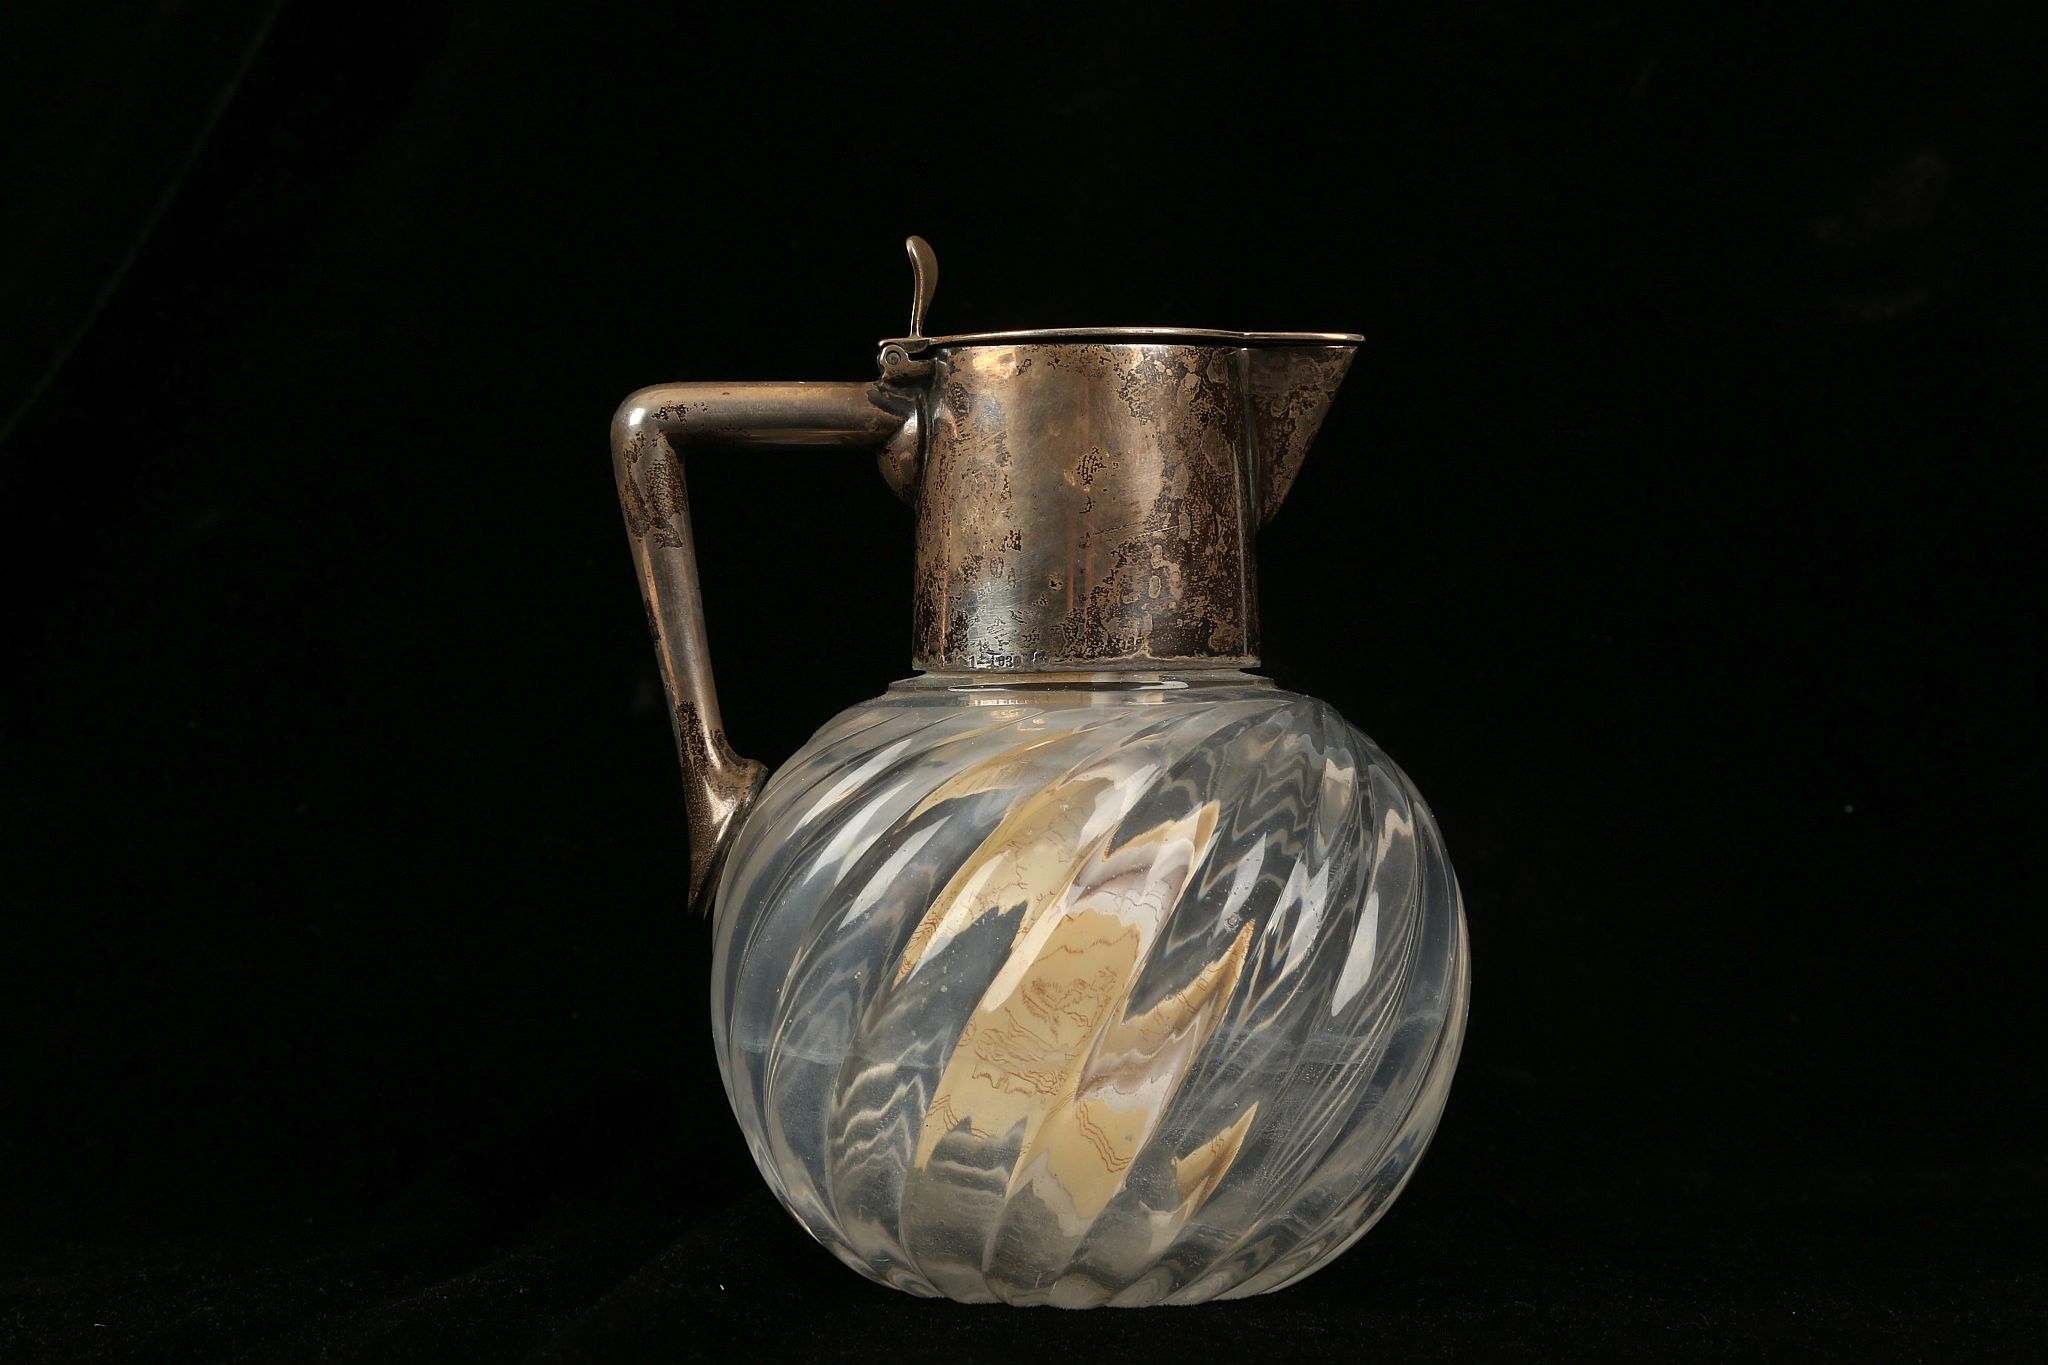 A CONTINENTAL AESTHETIC MOVEMENT CLARET JUG, circa - Image 3 of 10